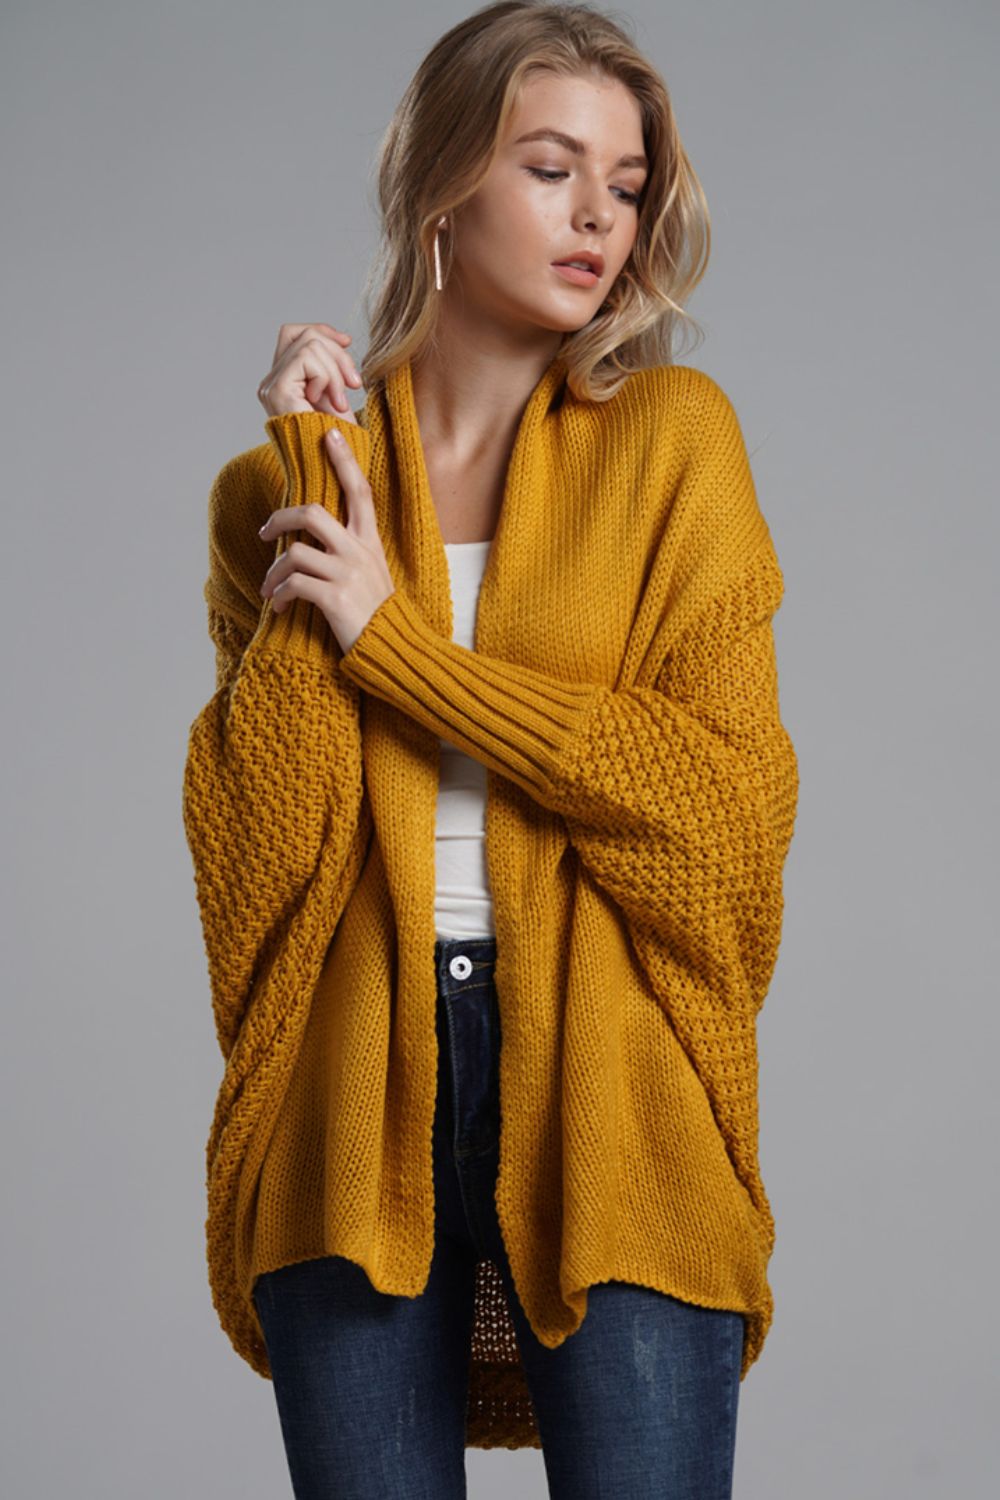 Dolman Sleeve Open Front Ribbed Trim Longline Cardigan - Yellow / One Size - Women’s Clothing & Accessories - Shirts